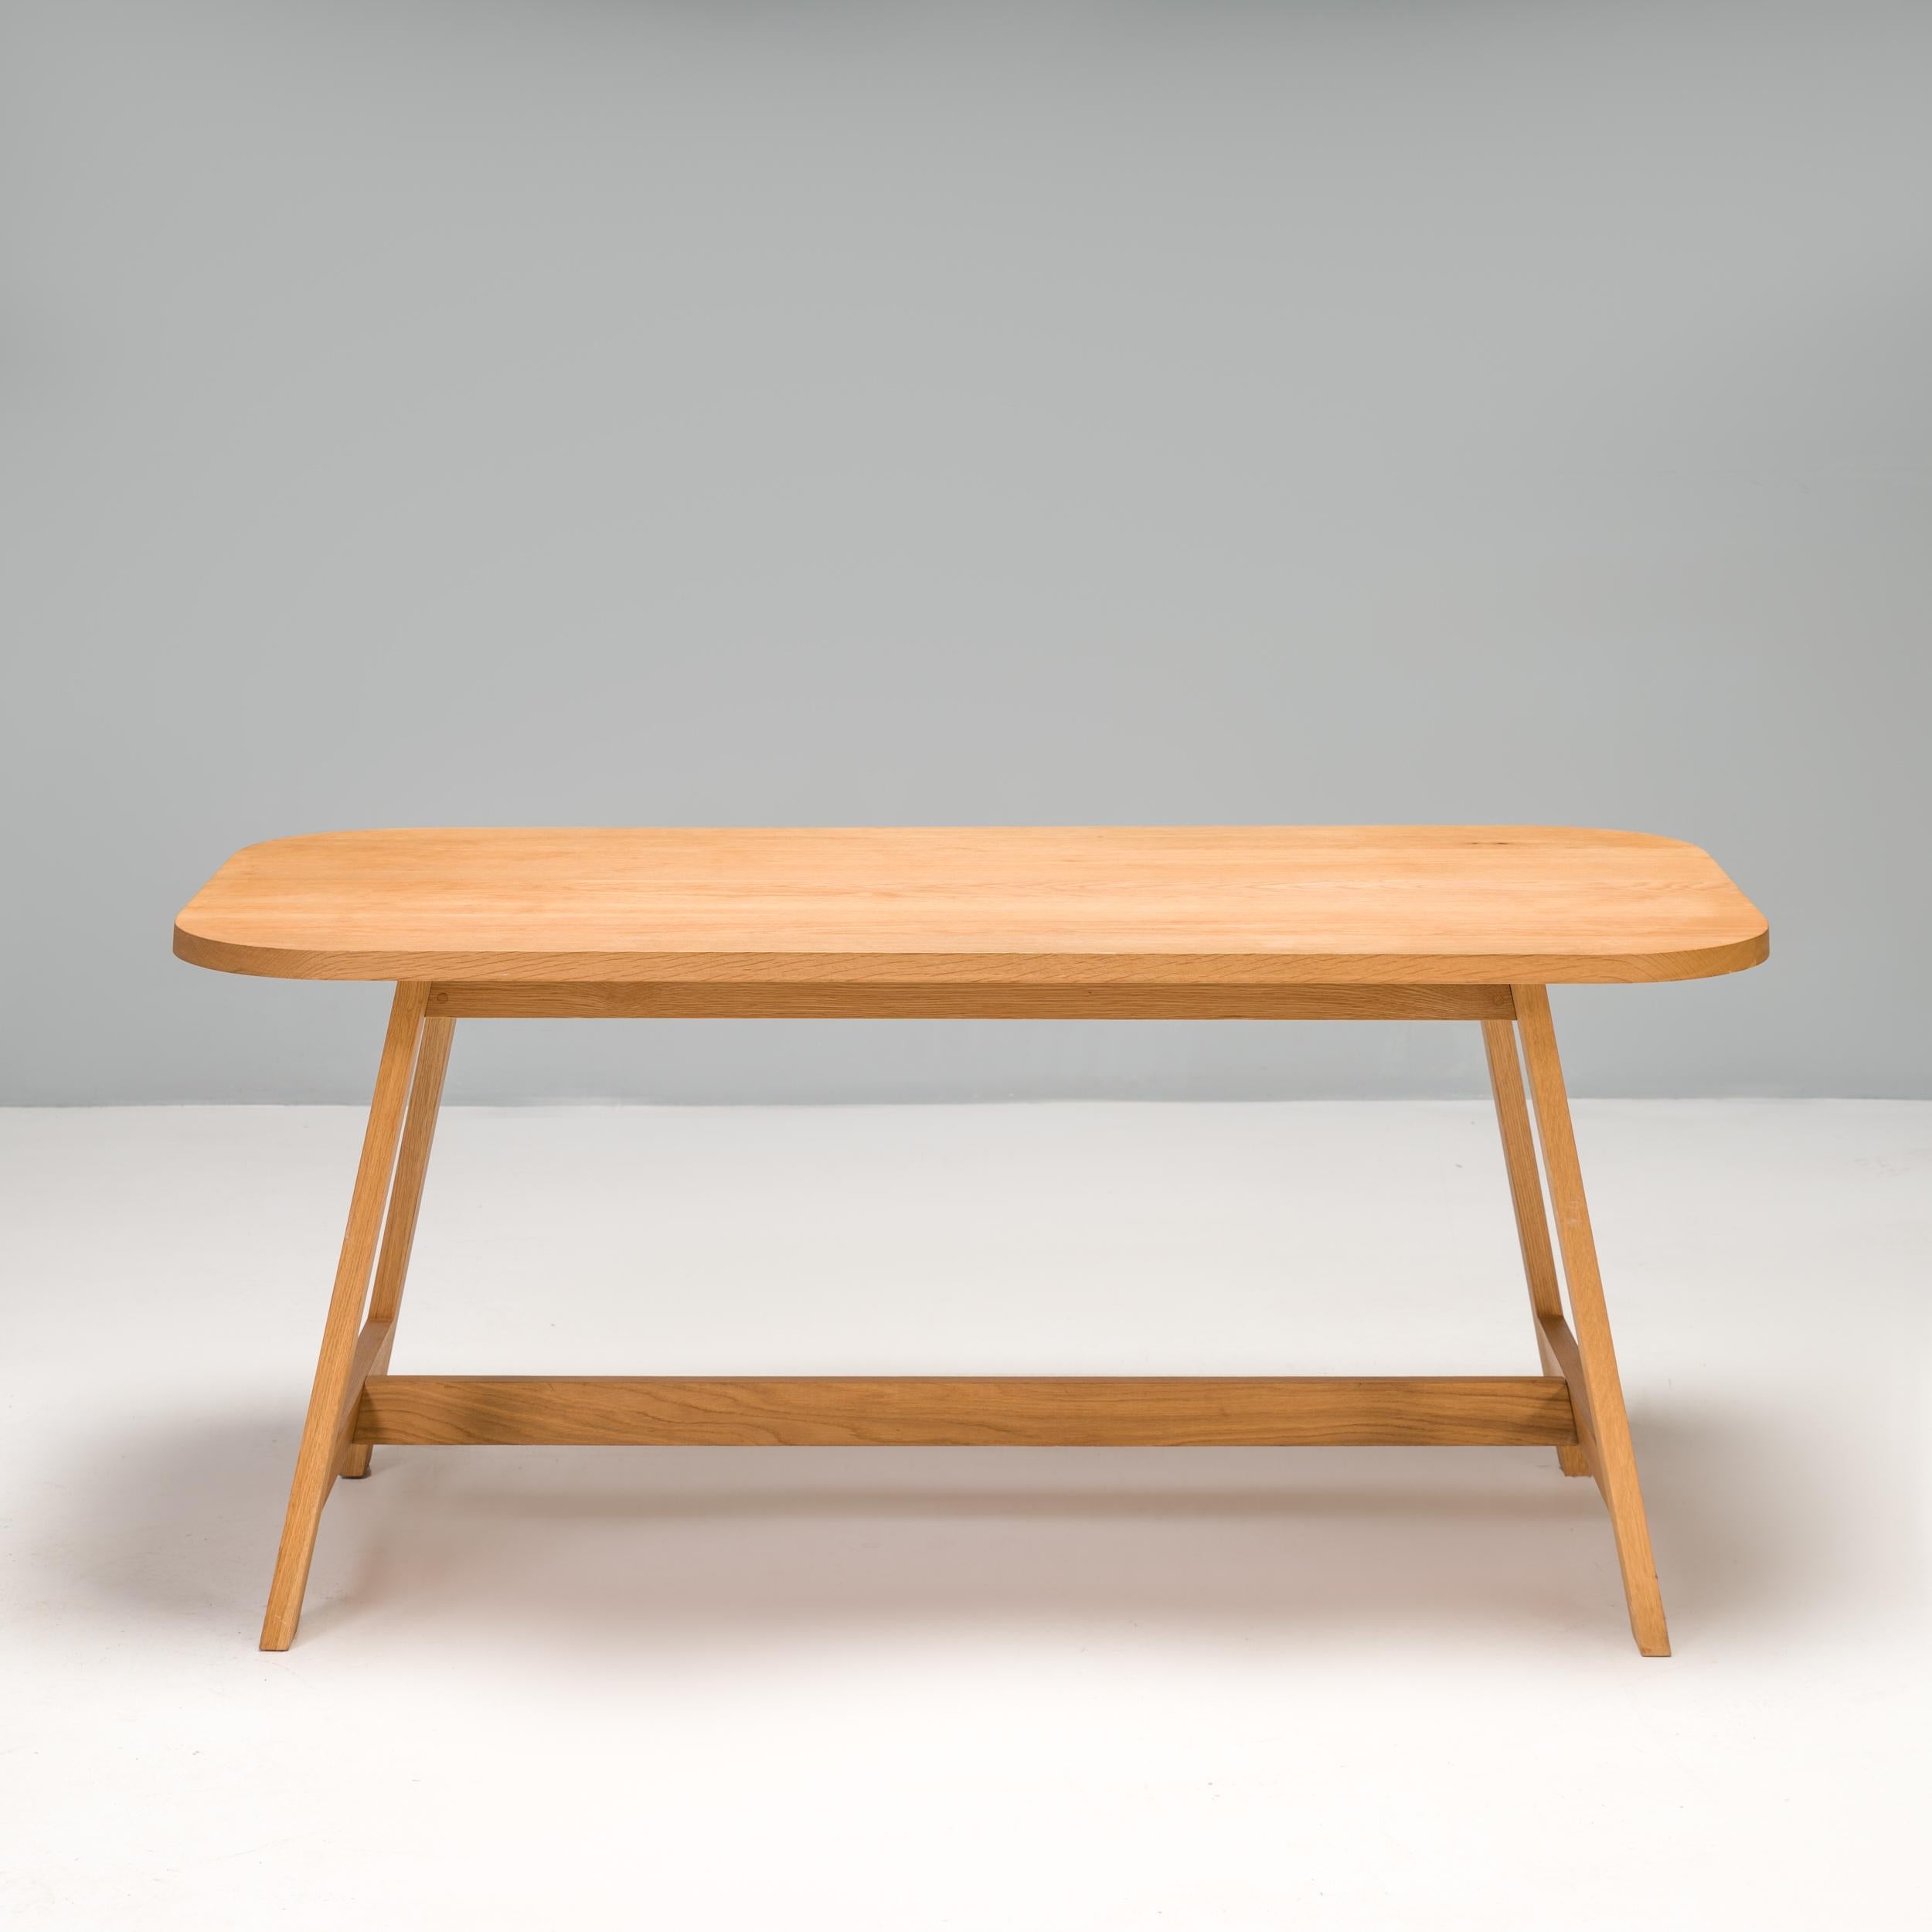 Founded in 2010, Another Country specialises in wooden furniture. The Three dining table was constructed in their Portugal workshop from sold certified oak wood.

The third series was inspired by marrying traditional Craft construction and